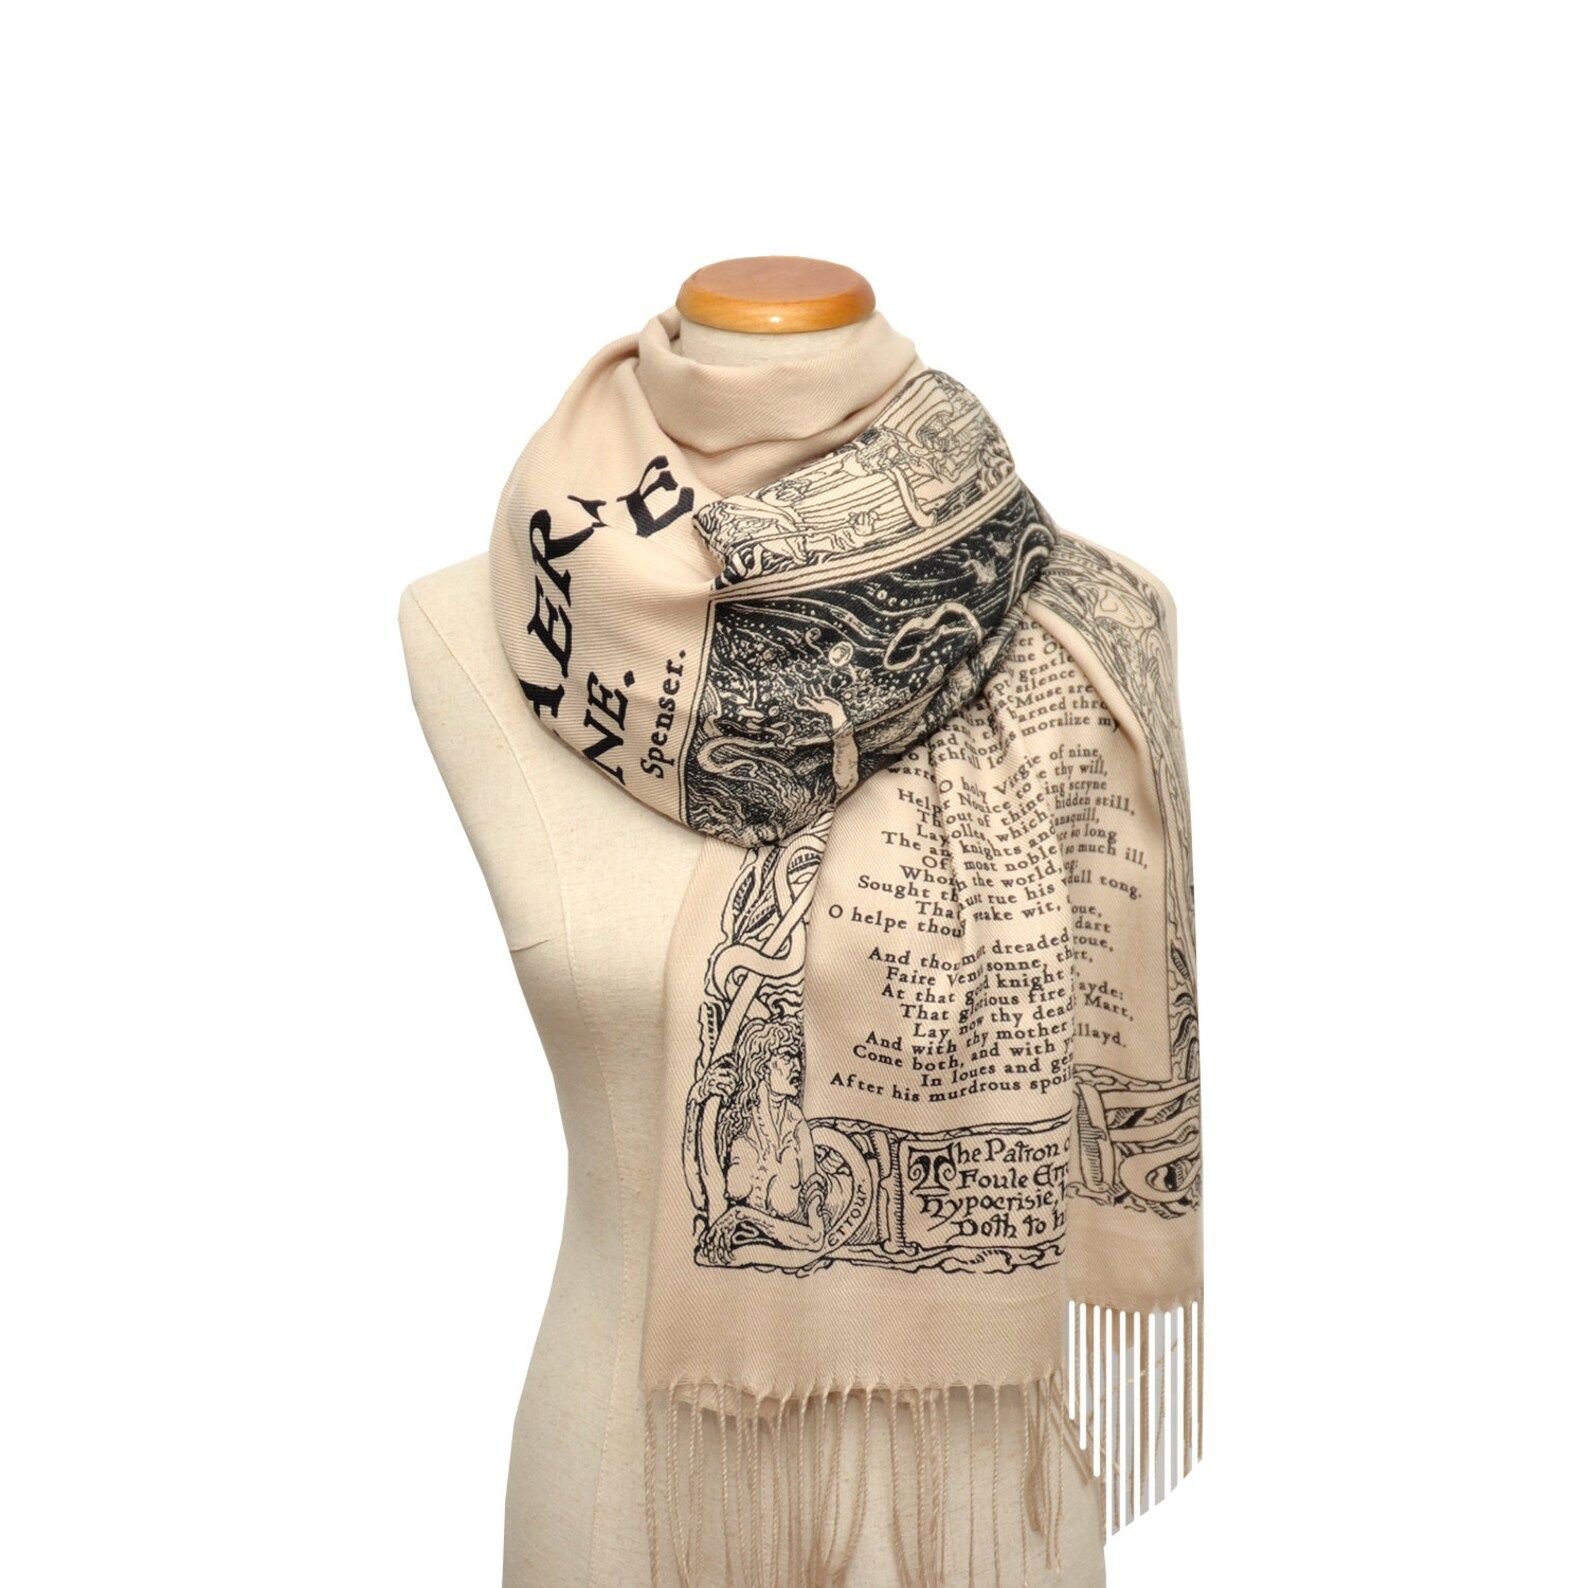 Picture of scarf with The Faerie Queene poem by Edmund Spenser printed on it